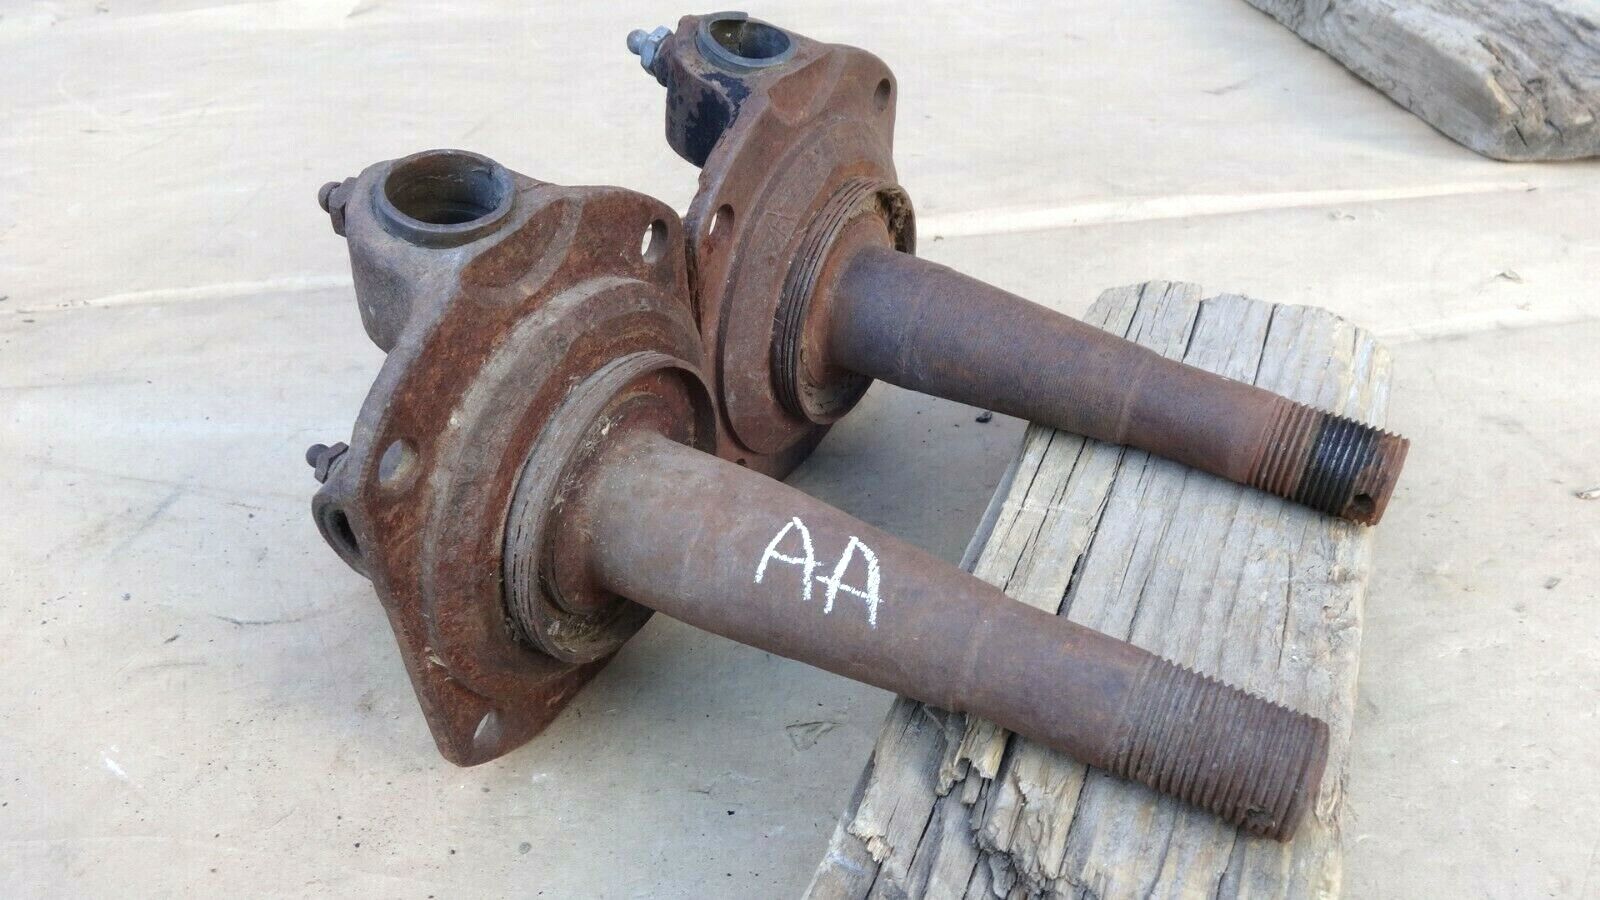 1928 1929 Model A Ford AA TRUCK FRONT SPINDLES Original pair Express